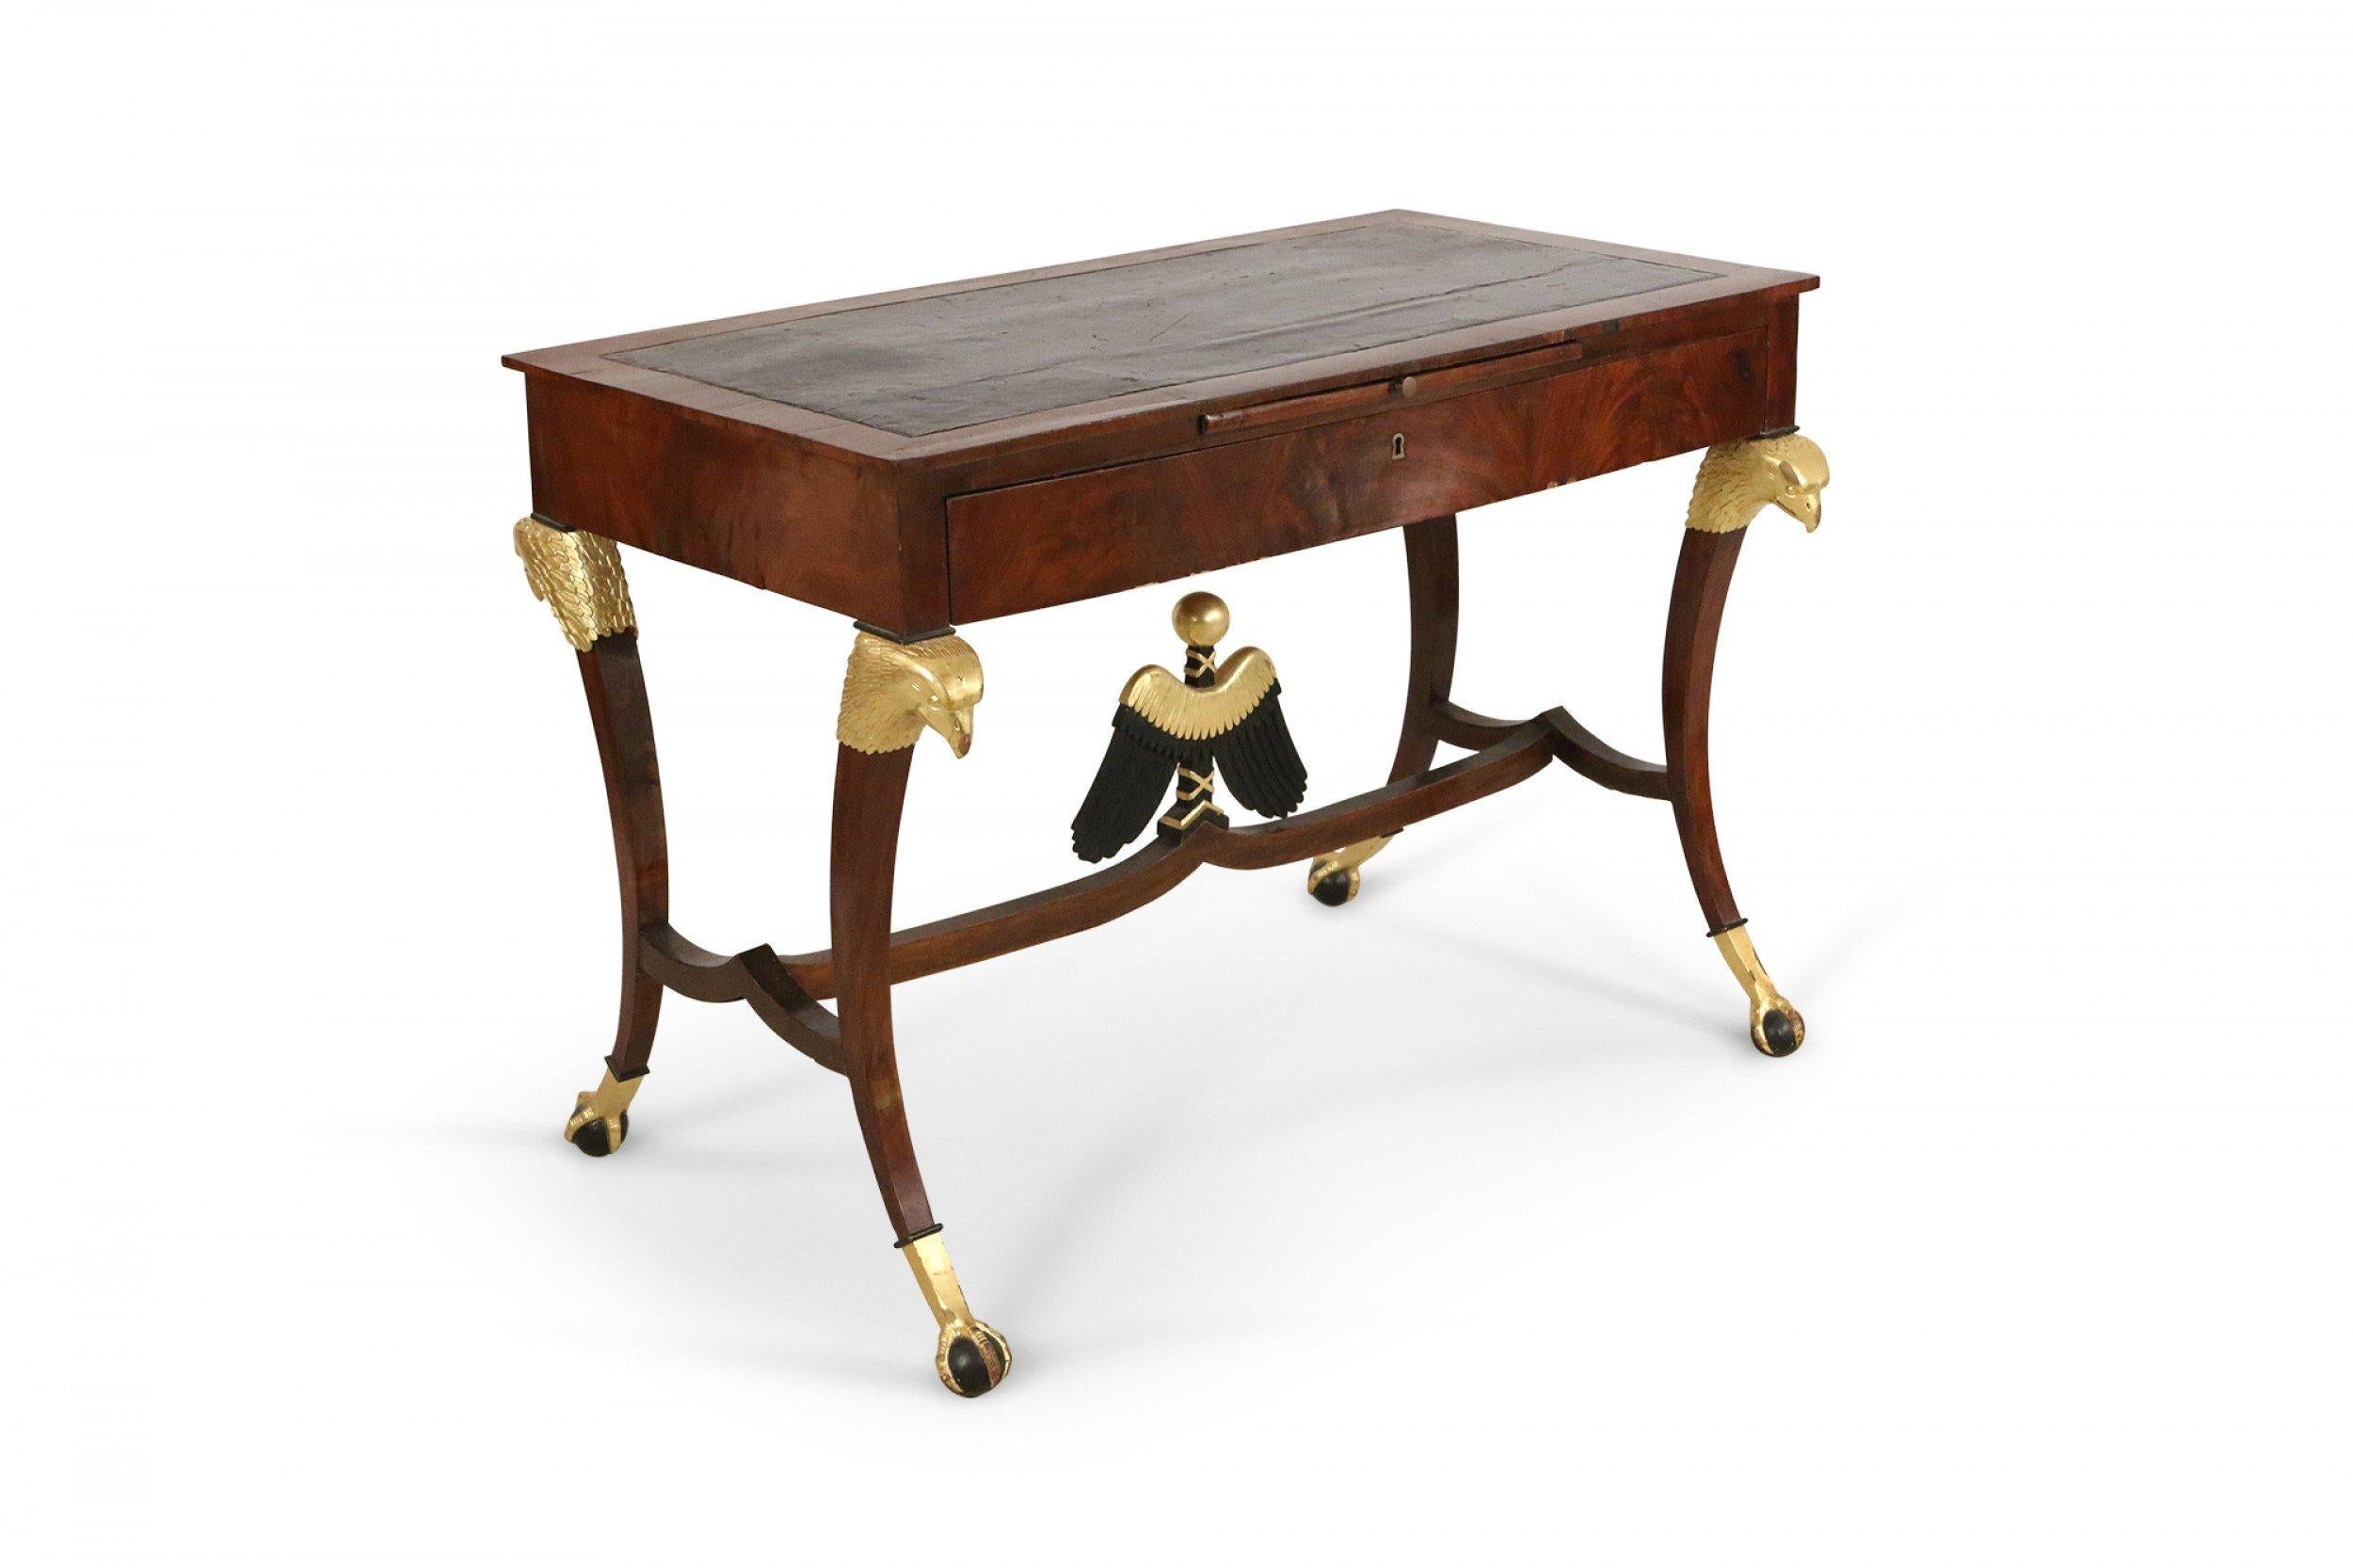 19th Century Russian Mahogany and Gilt Eagle Design Leather Top Desk For Sale 3